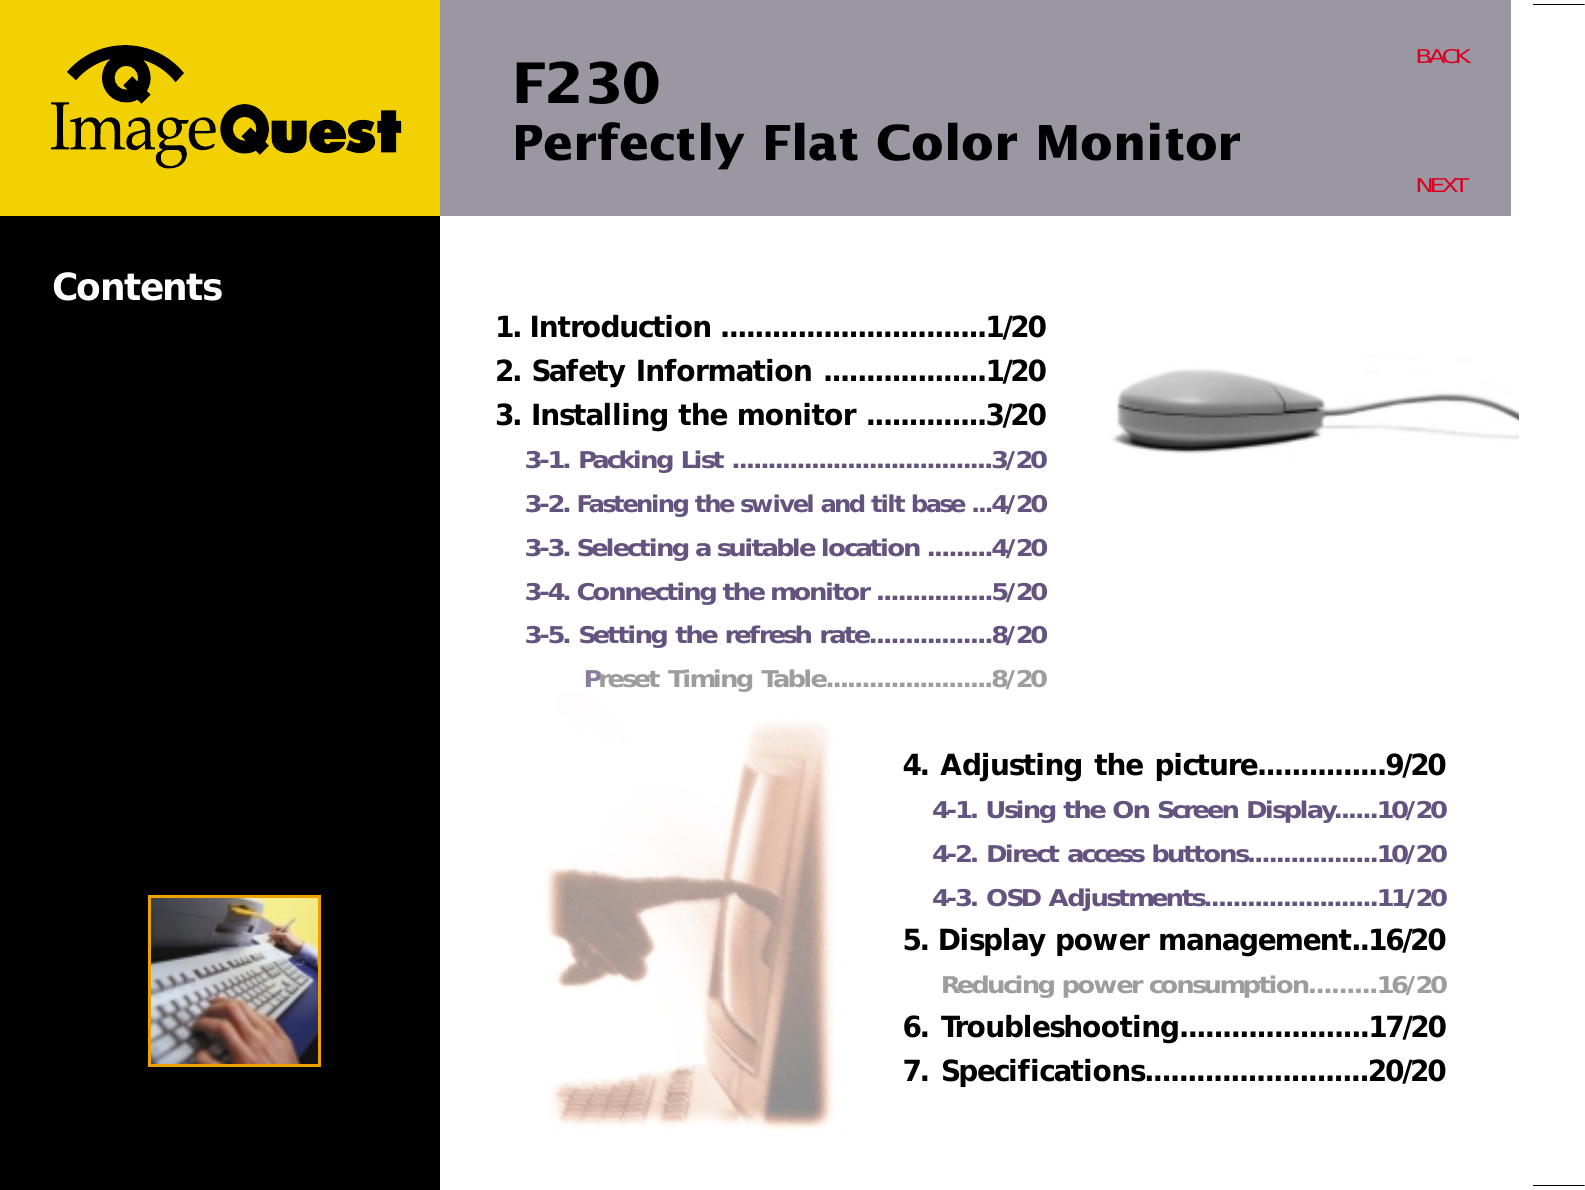 F230 Perfectly Flat Color MonitorBACKNEXTContents 1. Introduction ...............................1/202. Safety Information ...................1/203. Installing the monitor ..............3/203-1. Packing List ....................................3/203-2. Fastening the swivel and tilt base ...4/203-3. Selecting a suitable location .........4/203-4. Connecting the monitor ................5/203-5. Setting the refresh rate.................8/20Preset Timing Table.......................8/204. Adjusting the picture...............9/204-1. Using the On Screen Display......10/204-2. Direct access buttons..................10/204-3. OSD Adjustments........................11/205. Display power management..16/20Reducing power consumption.........16/206. Troubleshooting......................17/207. Specifications..........................20/20